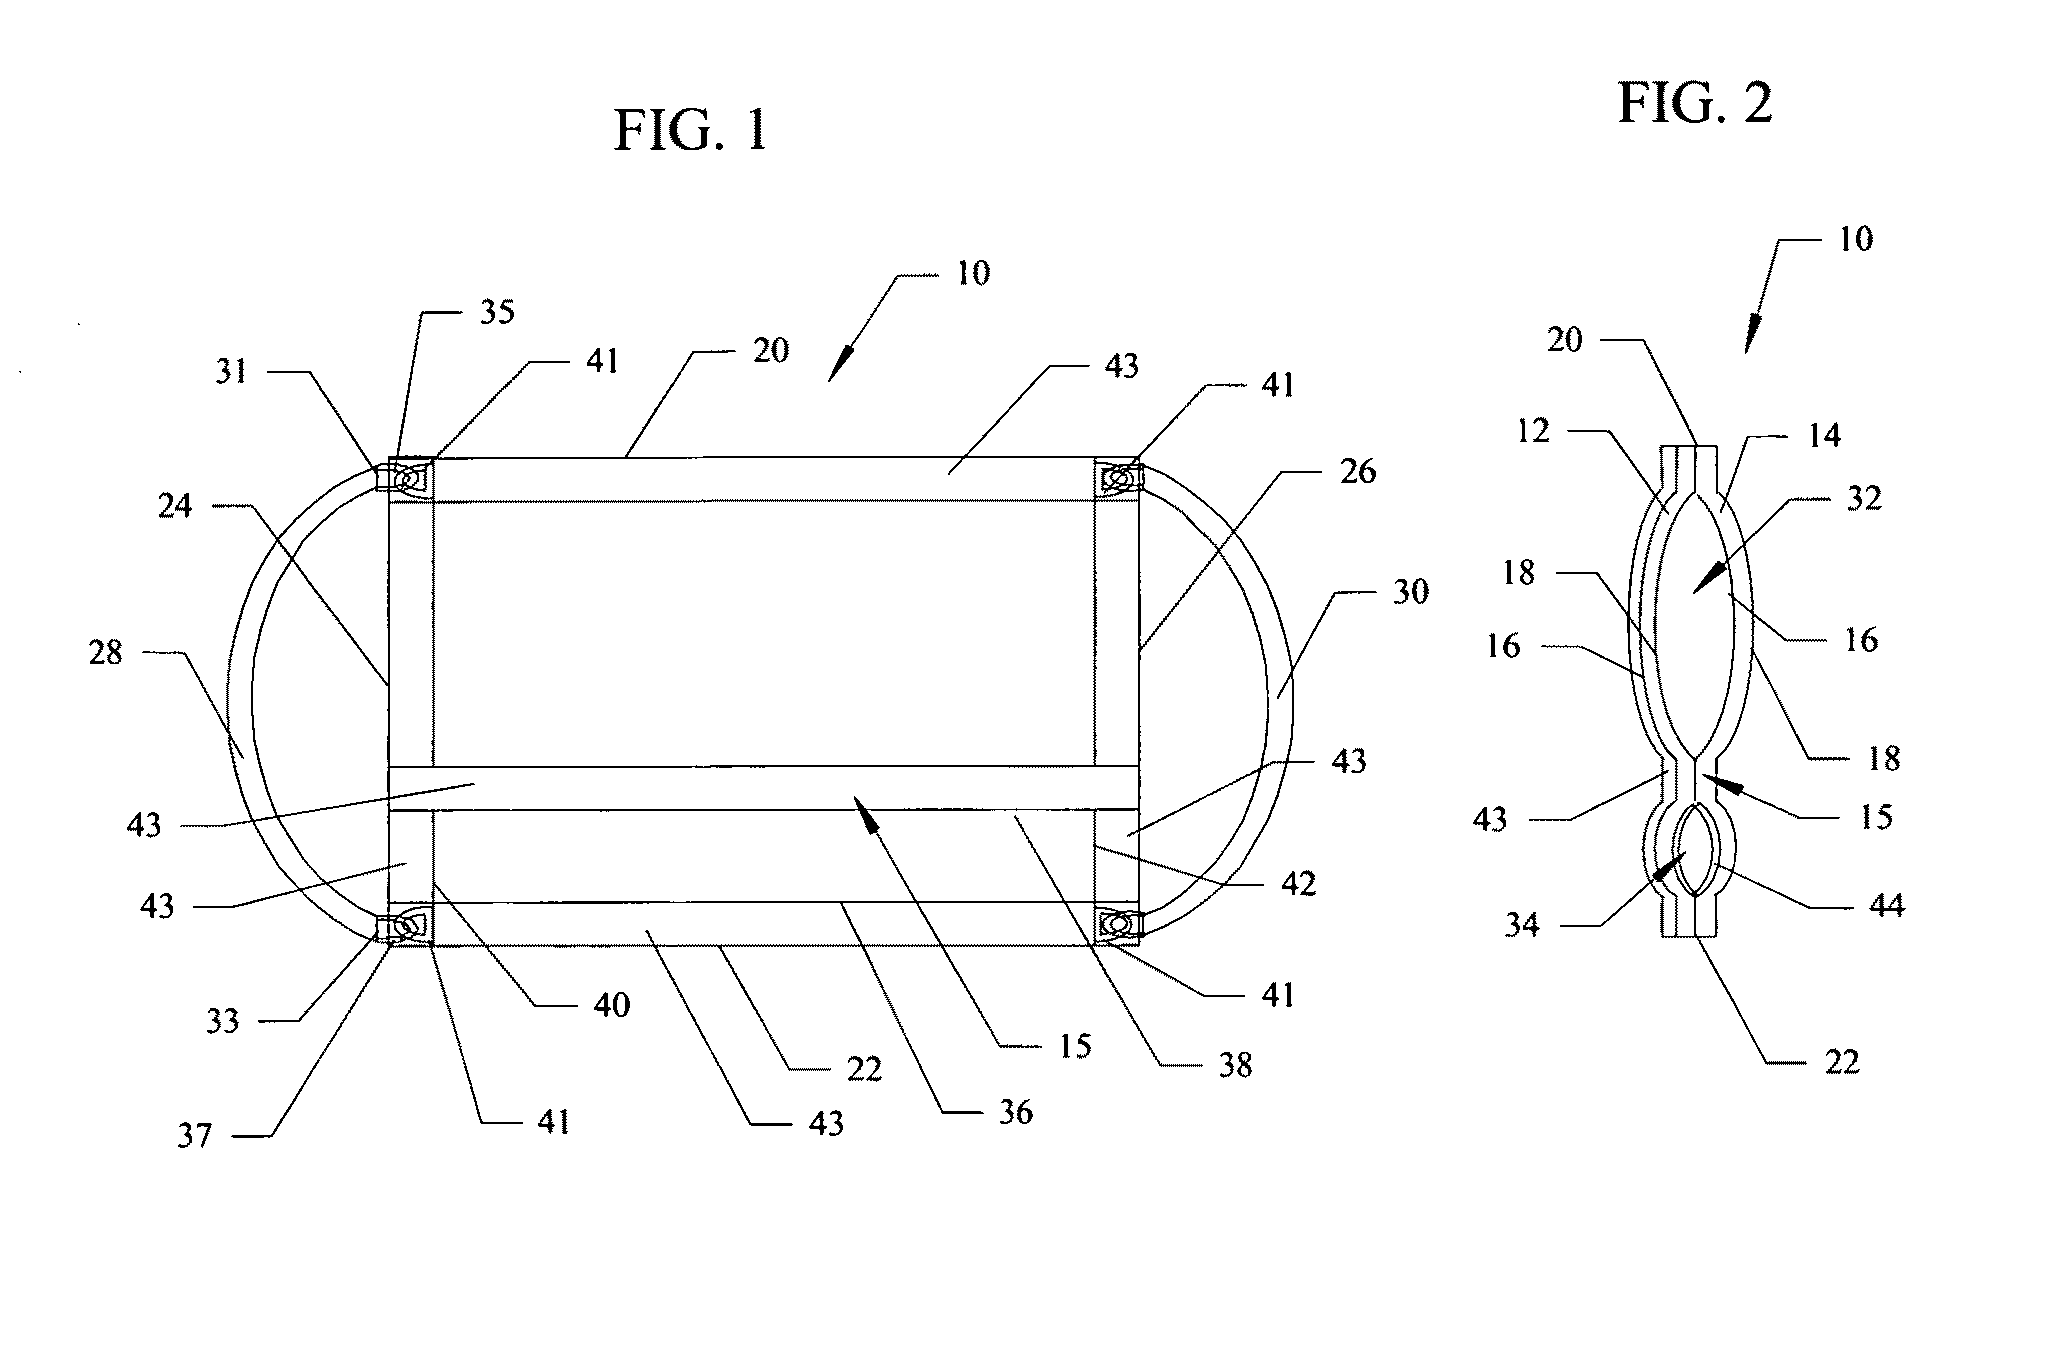 Snow removal device and kit